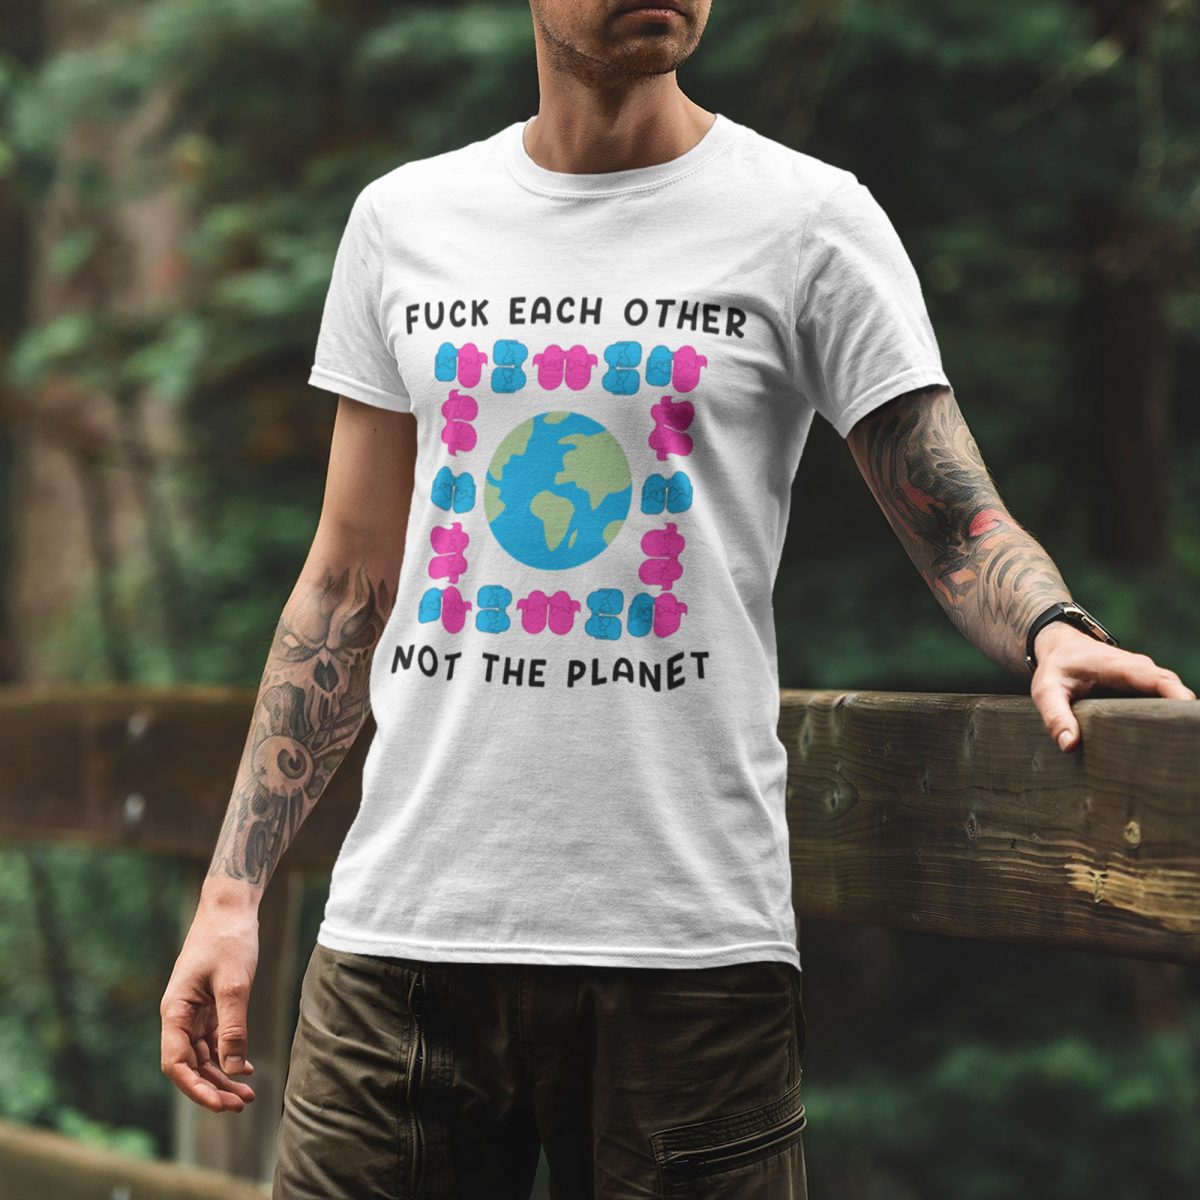 fuck-each-other-not-the-planet-filthy-BDSM-kinky-unisex-white-tshirt-3